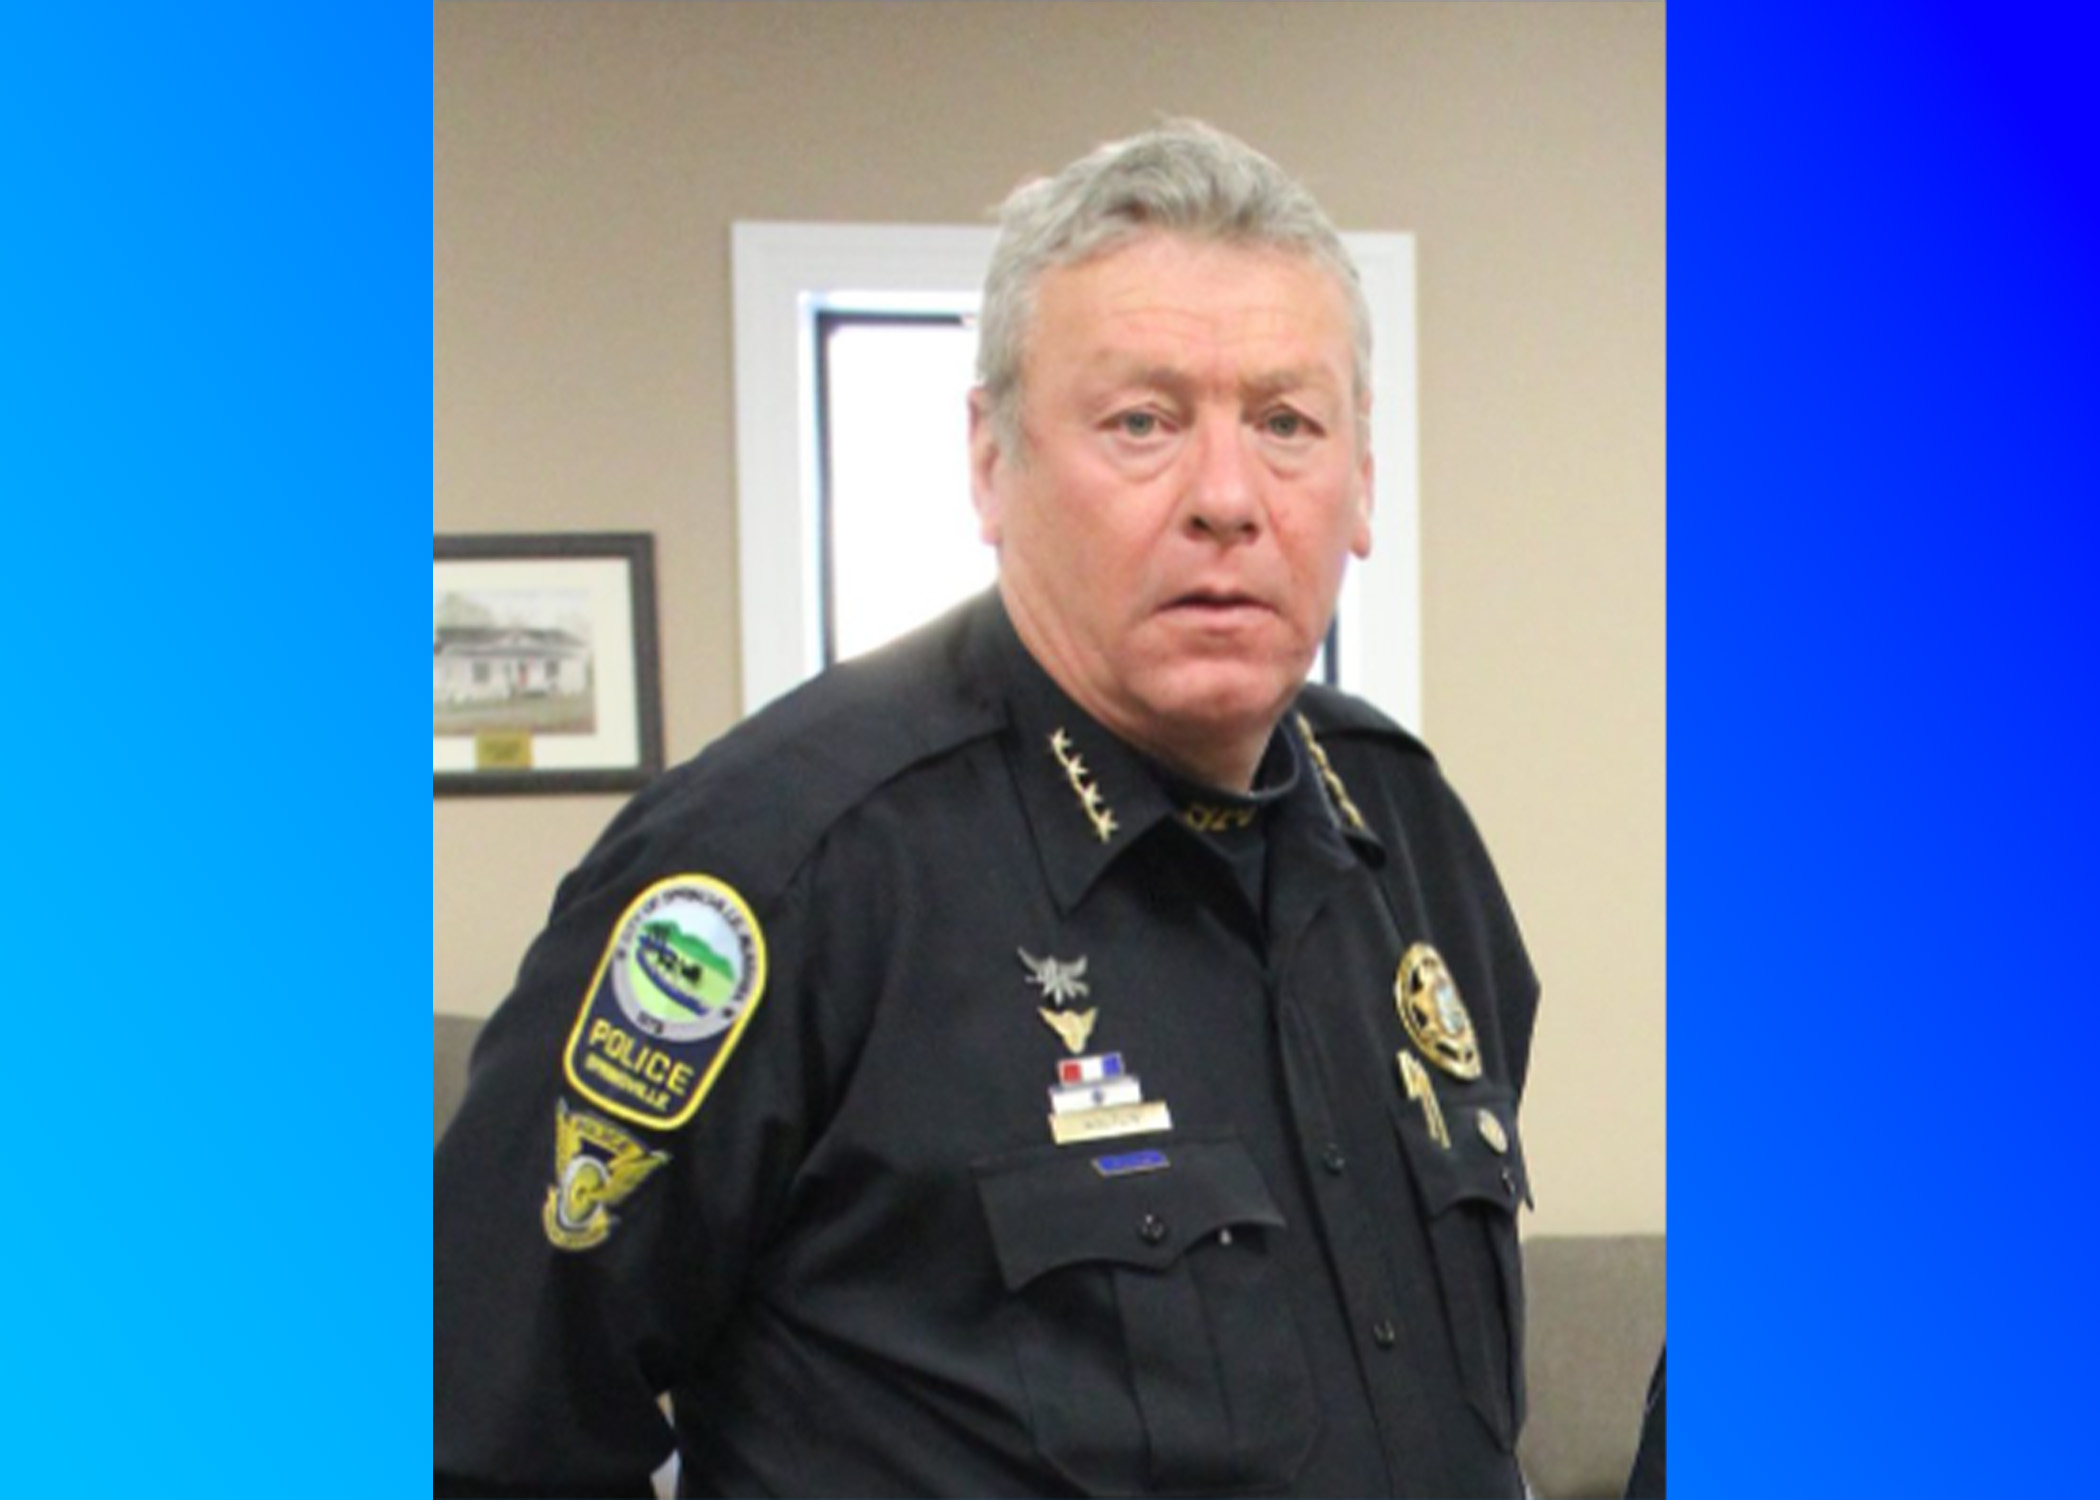 Springville police chief recognized at annual Association of Chiefs of Police Conference